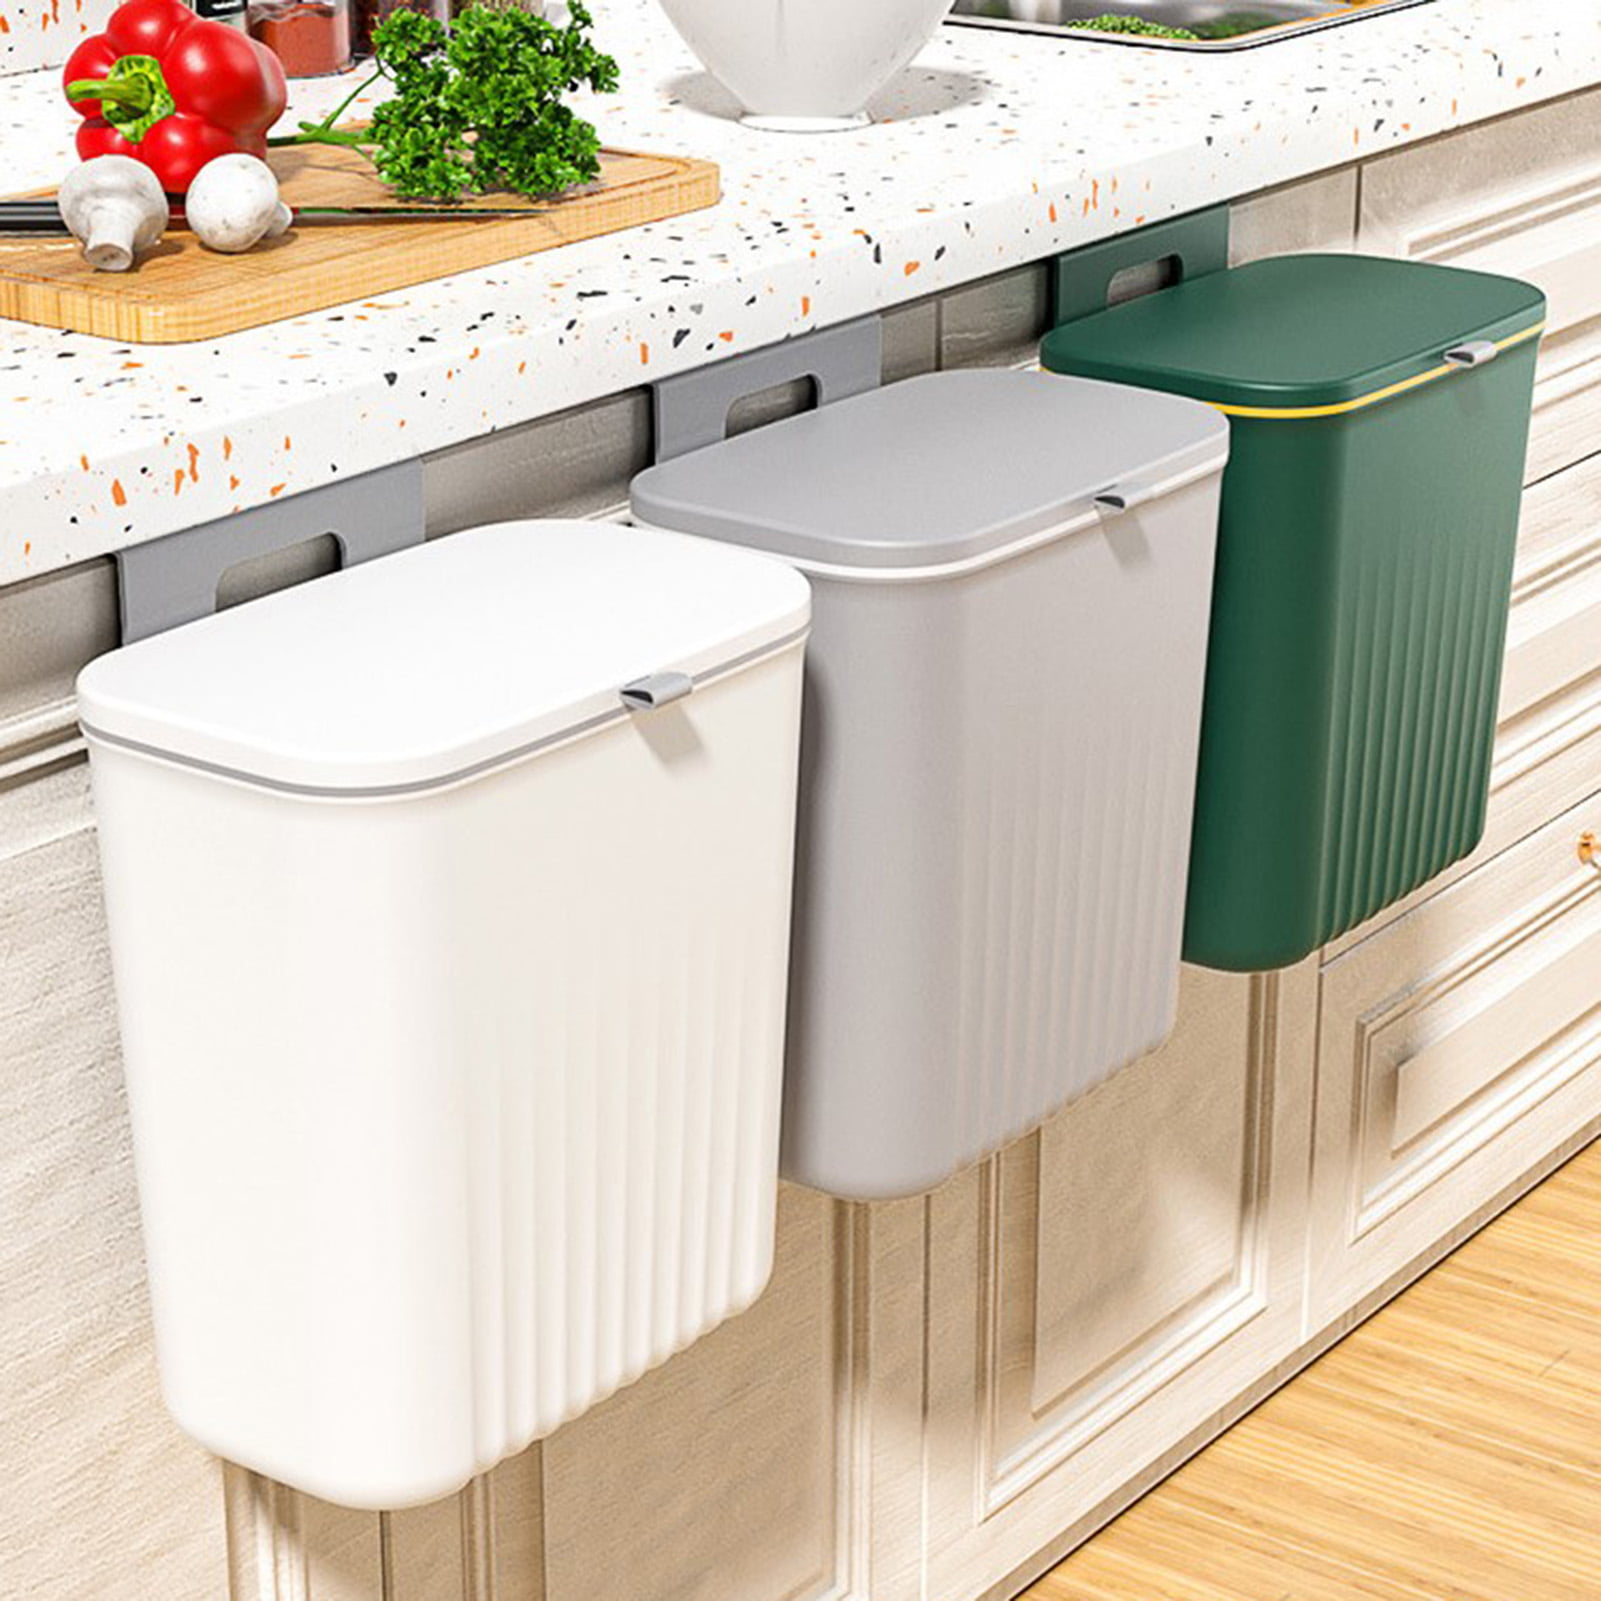 1pc Small Kitchen Trash Can Without Lid Suitable For Countertop Or Under  Sink, Kitchen Compost Bin, Hanging Garbage Can For Cabinet Door In Kitchen  Or Bathroom